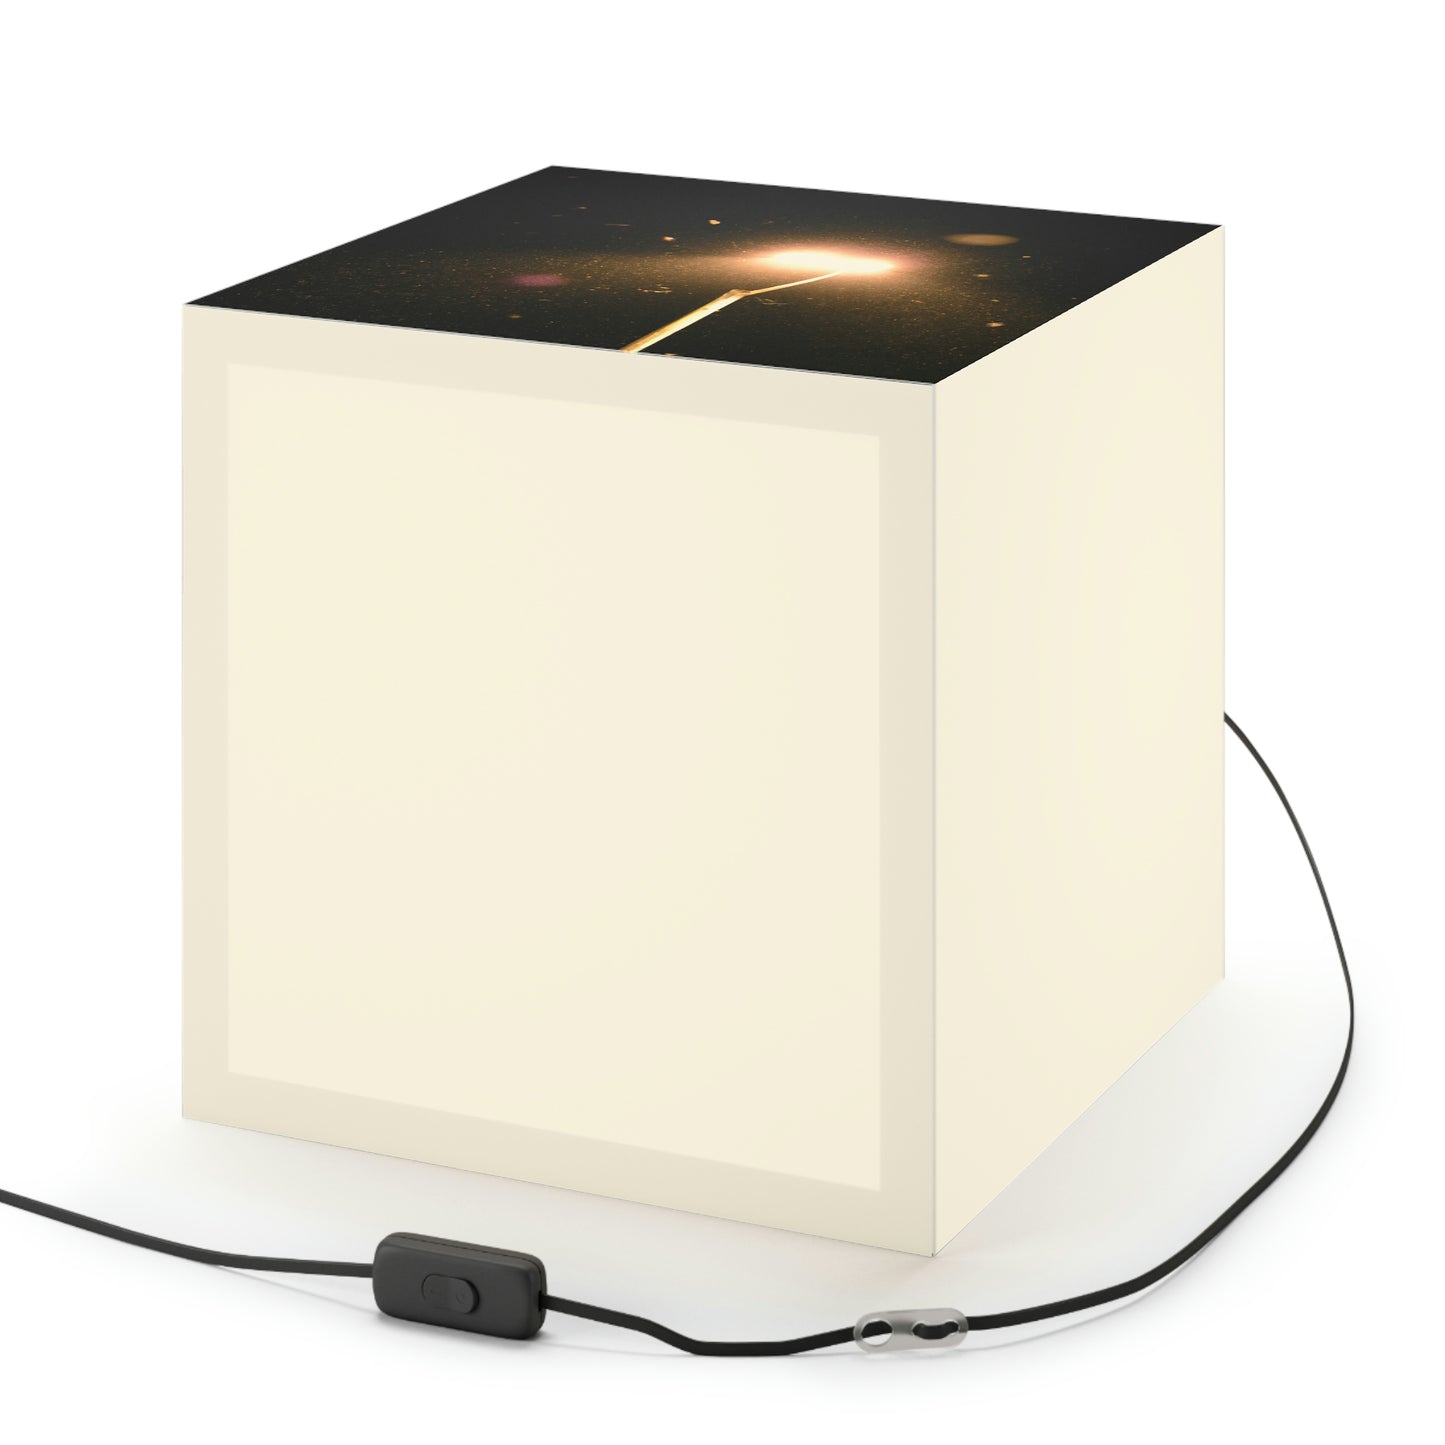 Winter's Lonely Lullaby - The Alien Light Cube Lamp